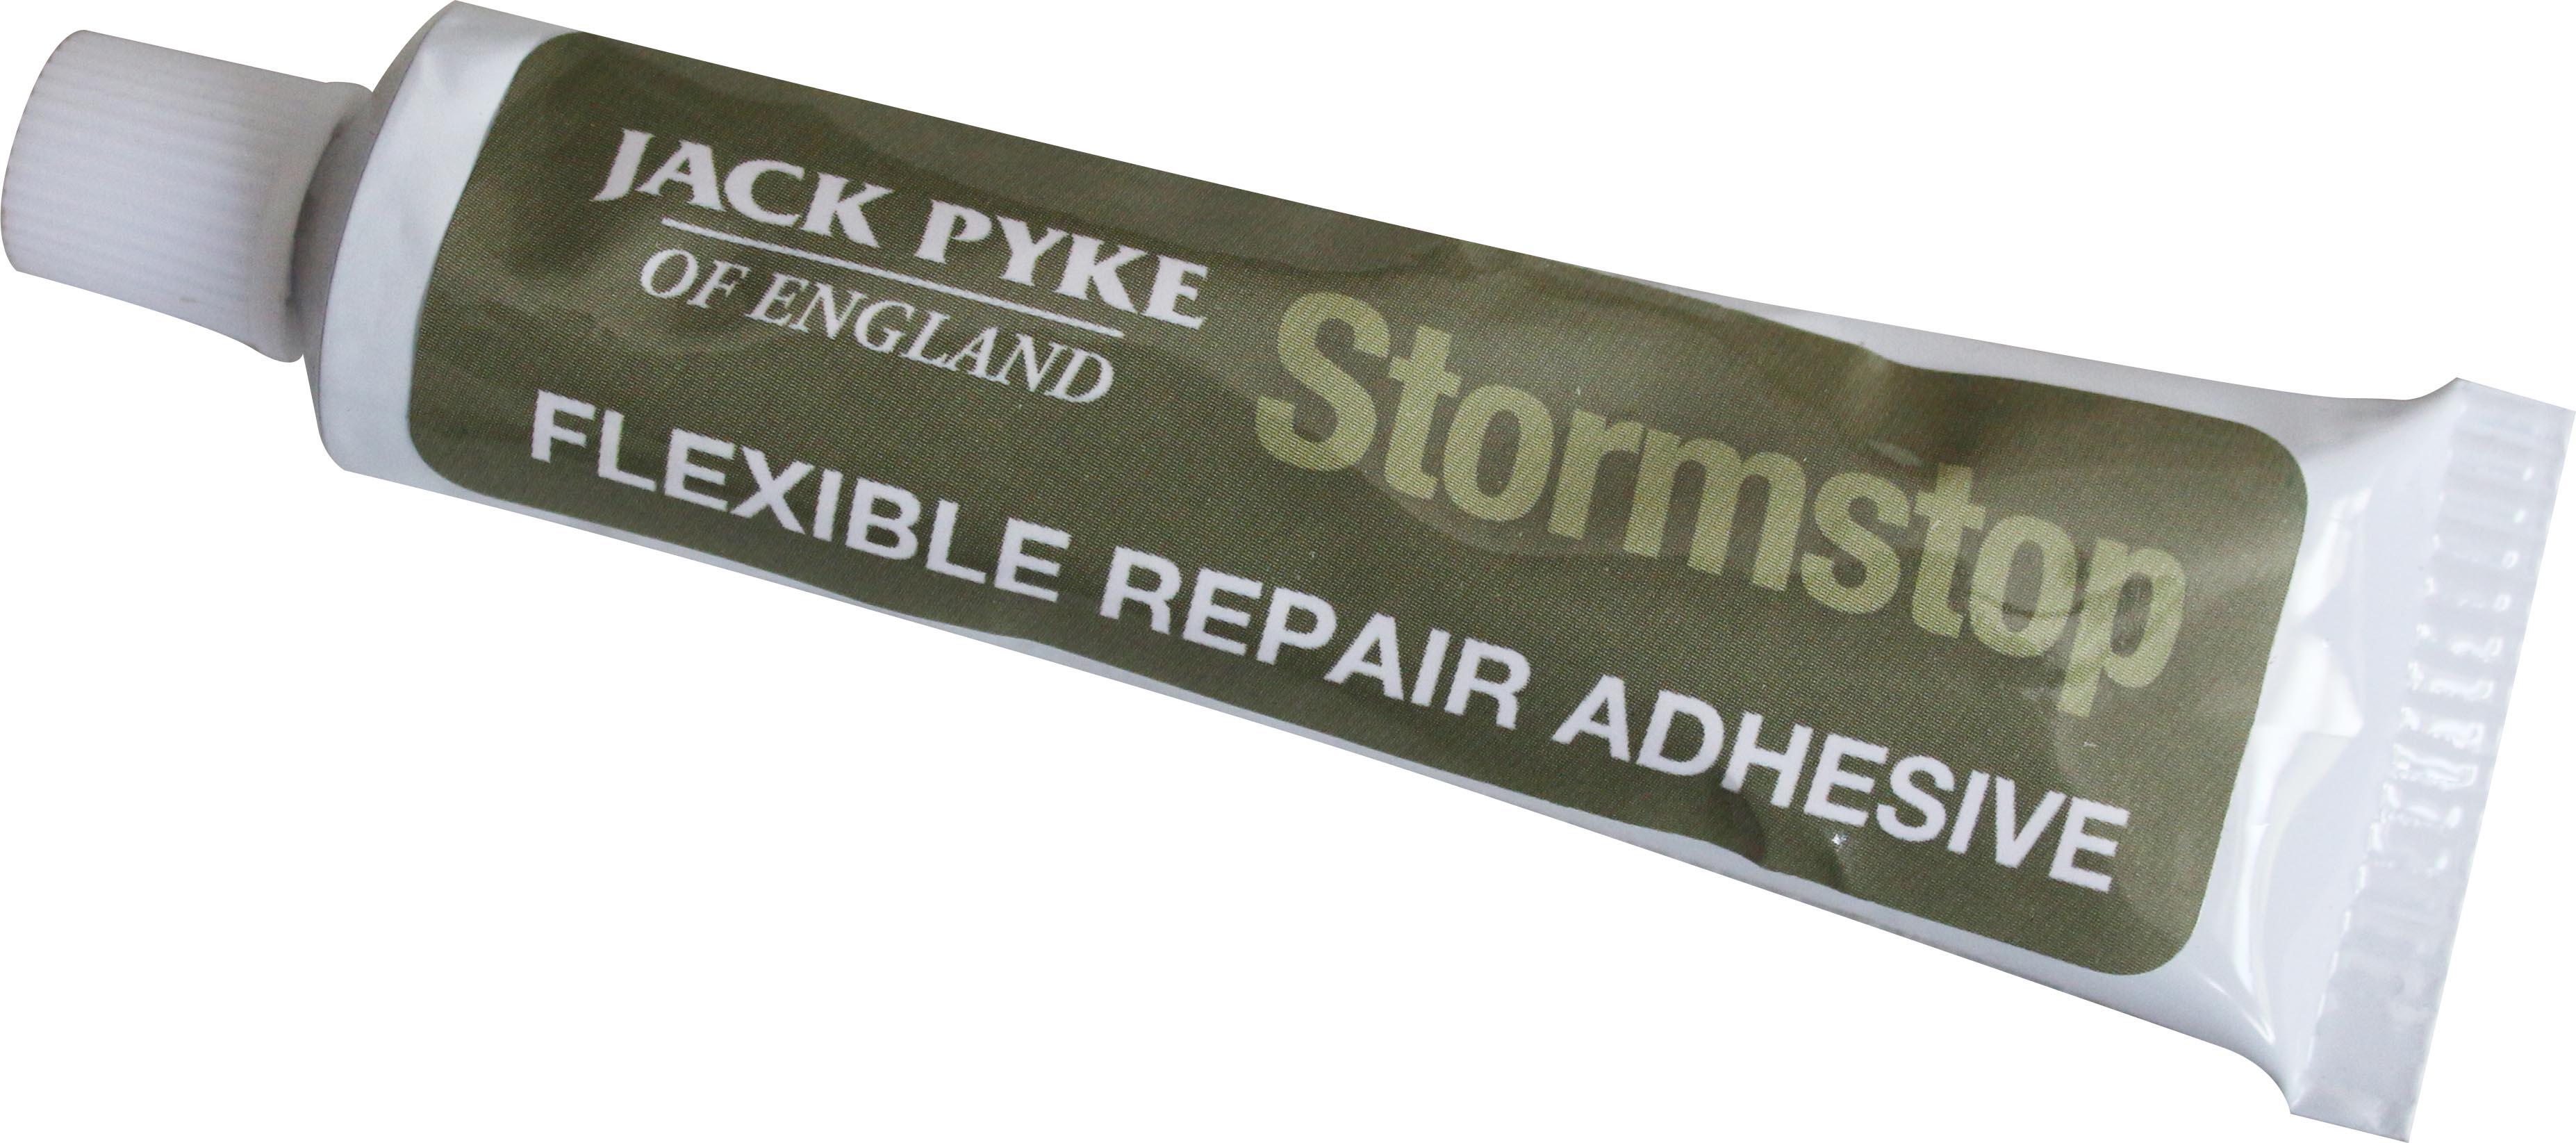 Jack Pyke Seam and Hole Repairer